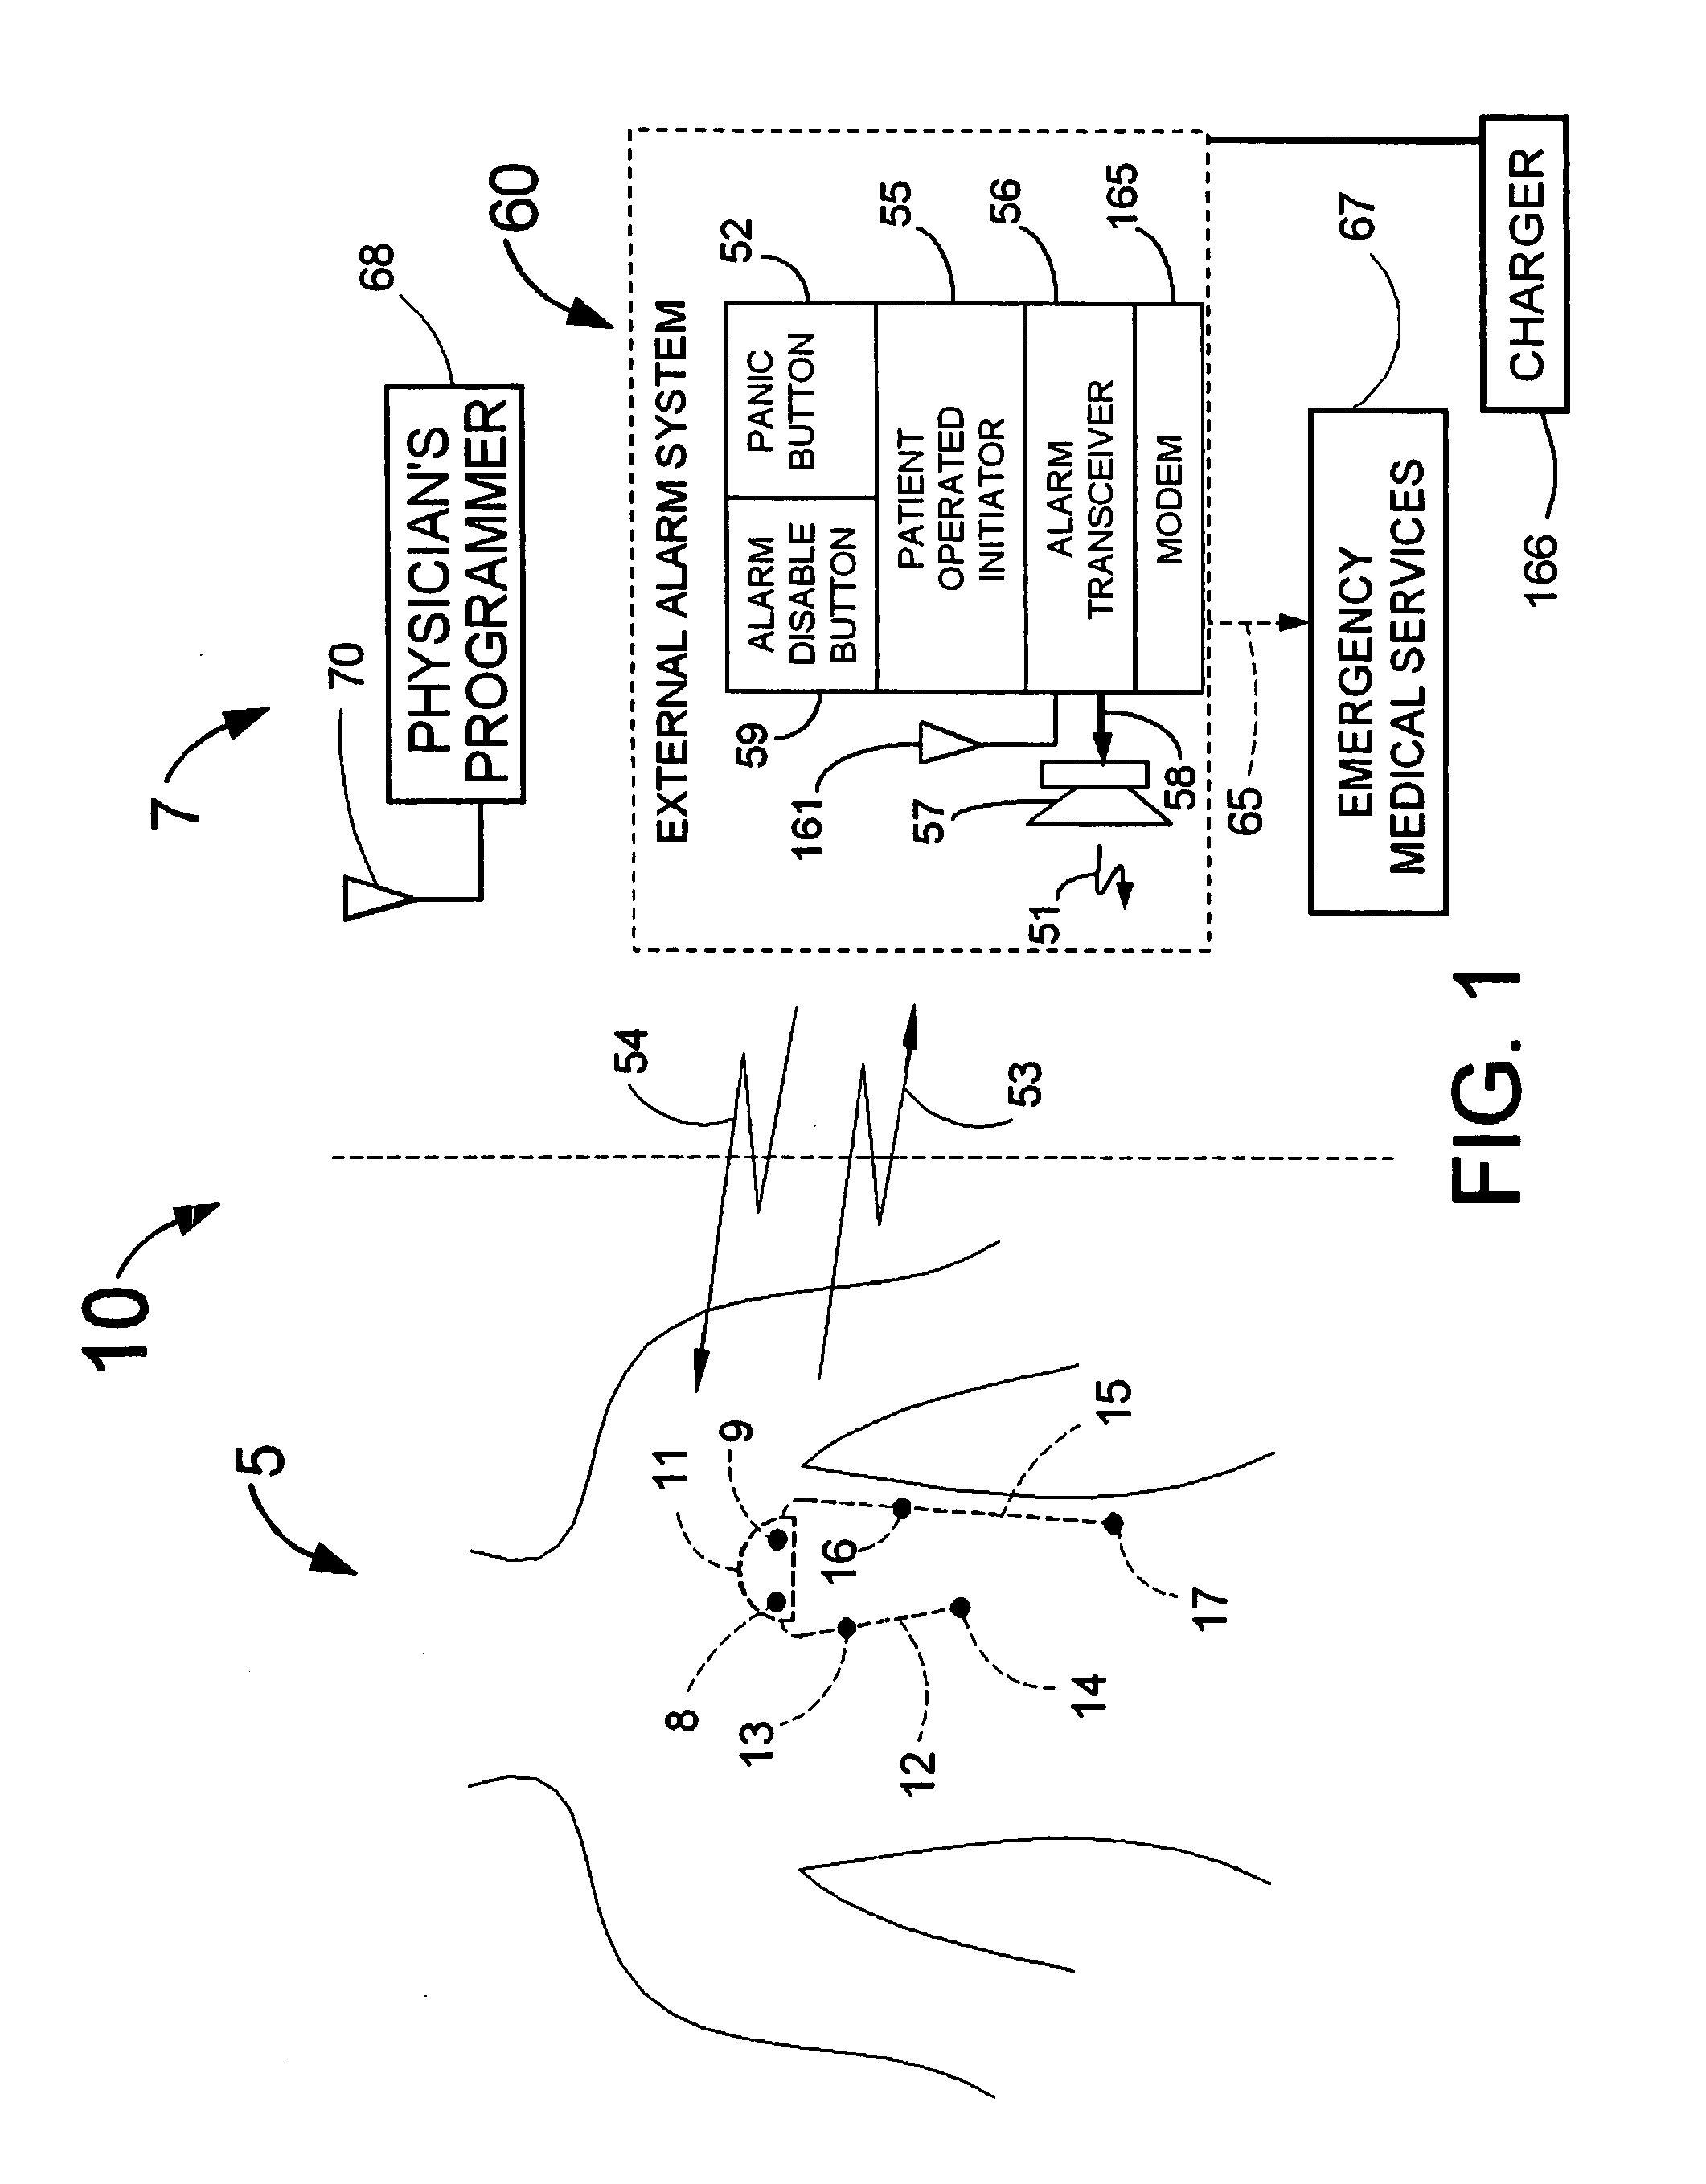 Means and method for the detection of cardiac events